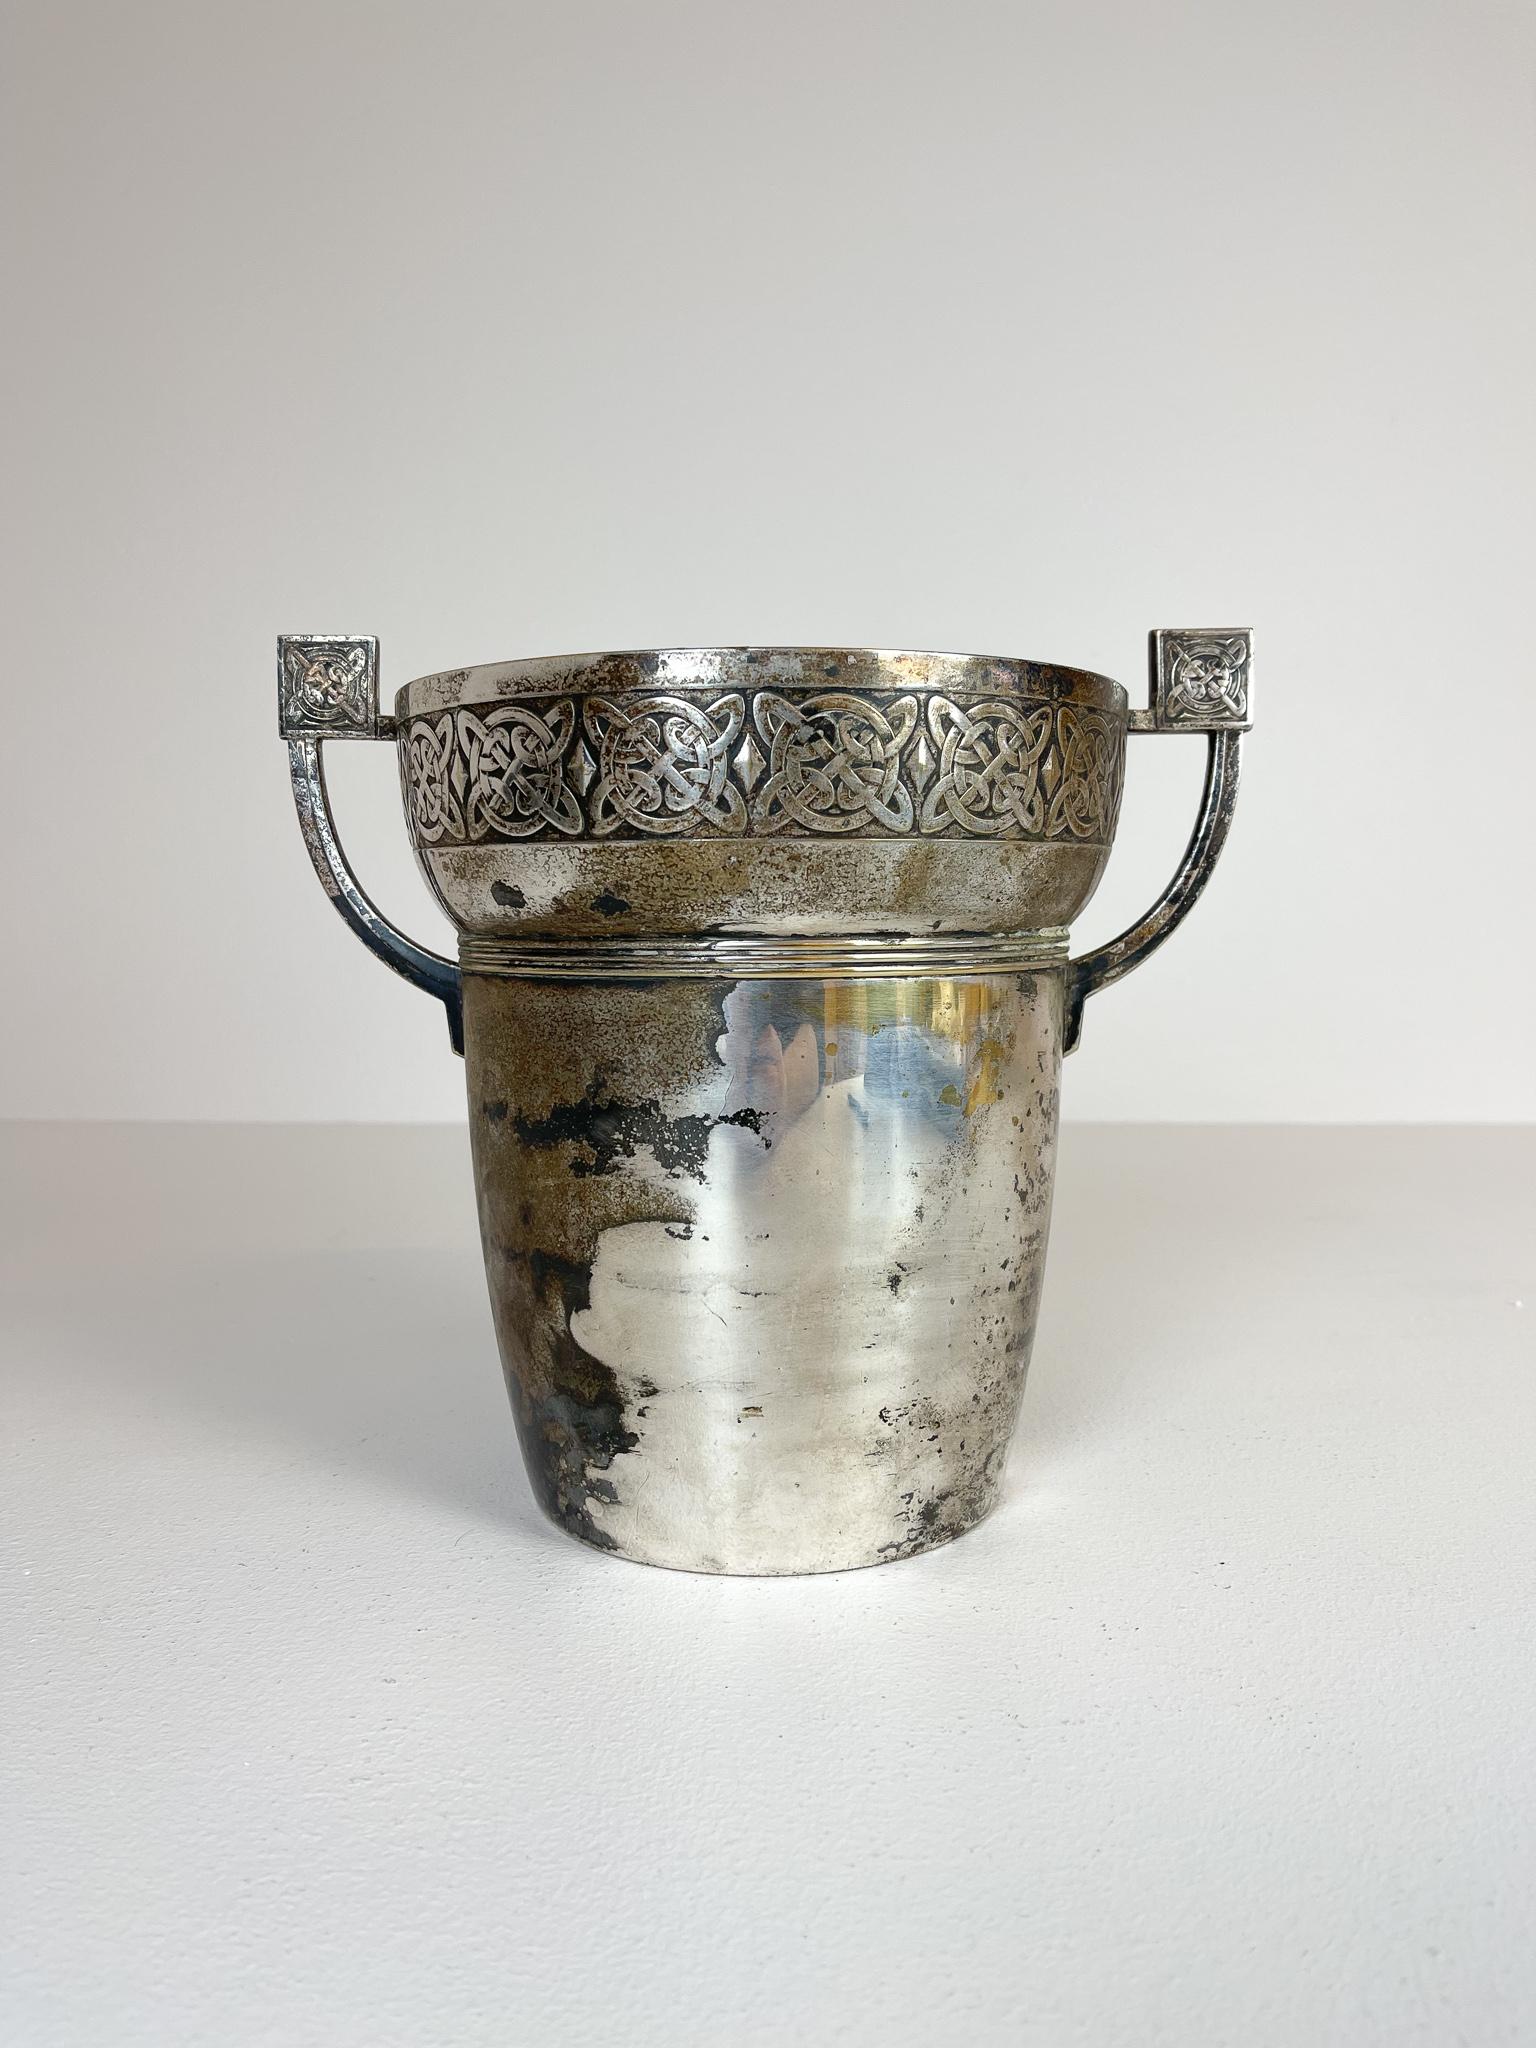 This champagne cooler is made in nickel silver and has a genuinely nice relief pattern and is crafted by hand.

Good condition with annealing that we have leaving bee to give authenticity to the piece. 


Measure: H 22, D 27 cm.